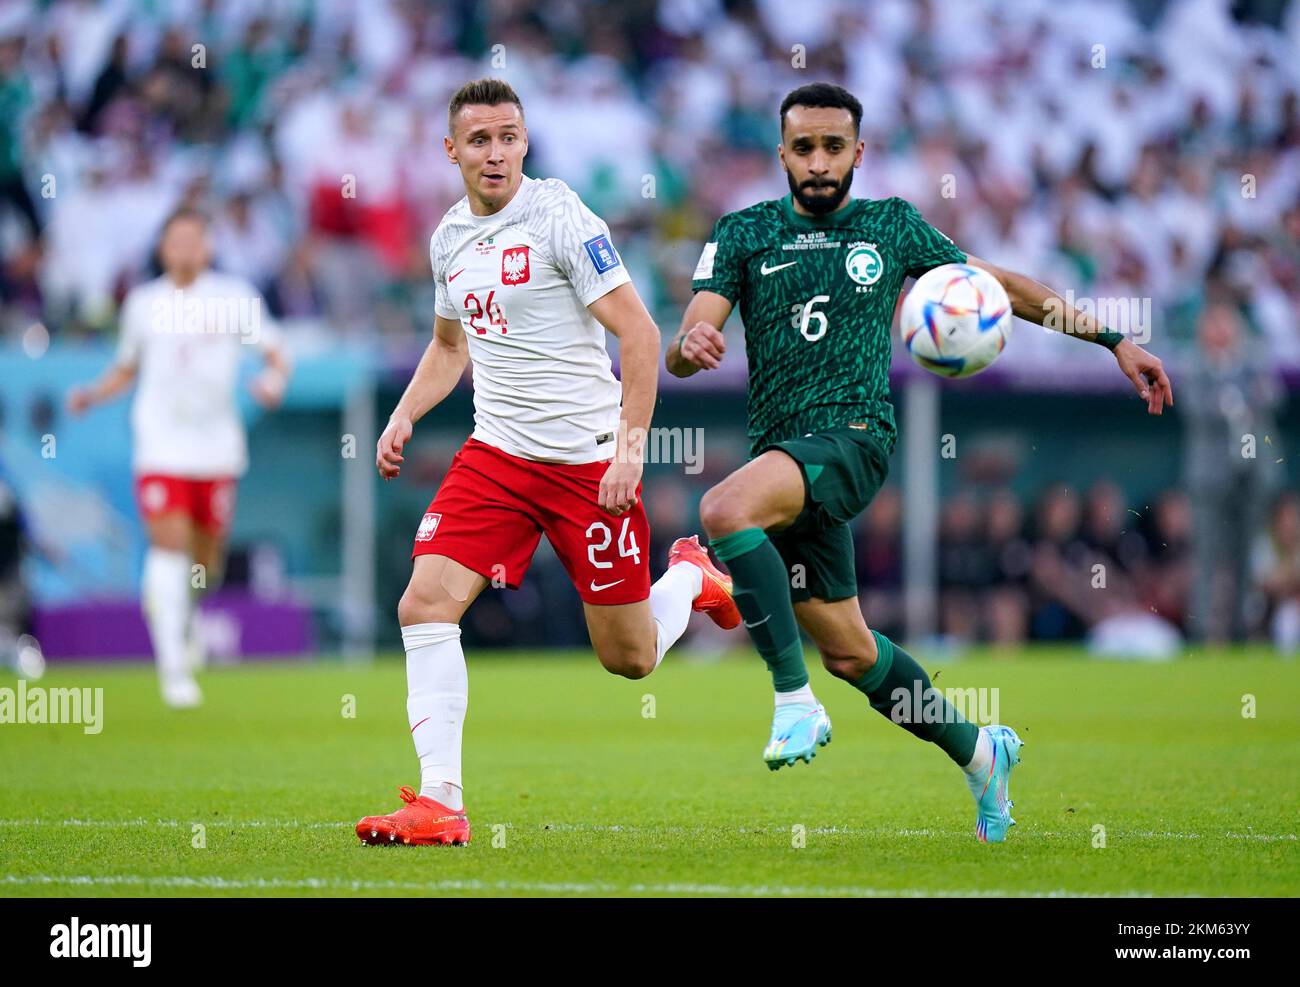 Poland's Przemyslaw Frankowski (left) and Saudi Arabia's Mohammed Al-Breik battle for the ball during the FIFA World Cup Group C match at the Education City Stadium in Doha, Qatar. Picture date: Saturday November 26, 2022. Stock Photo